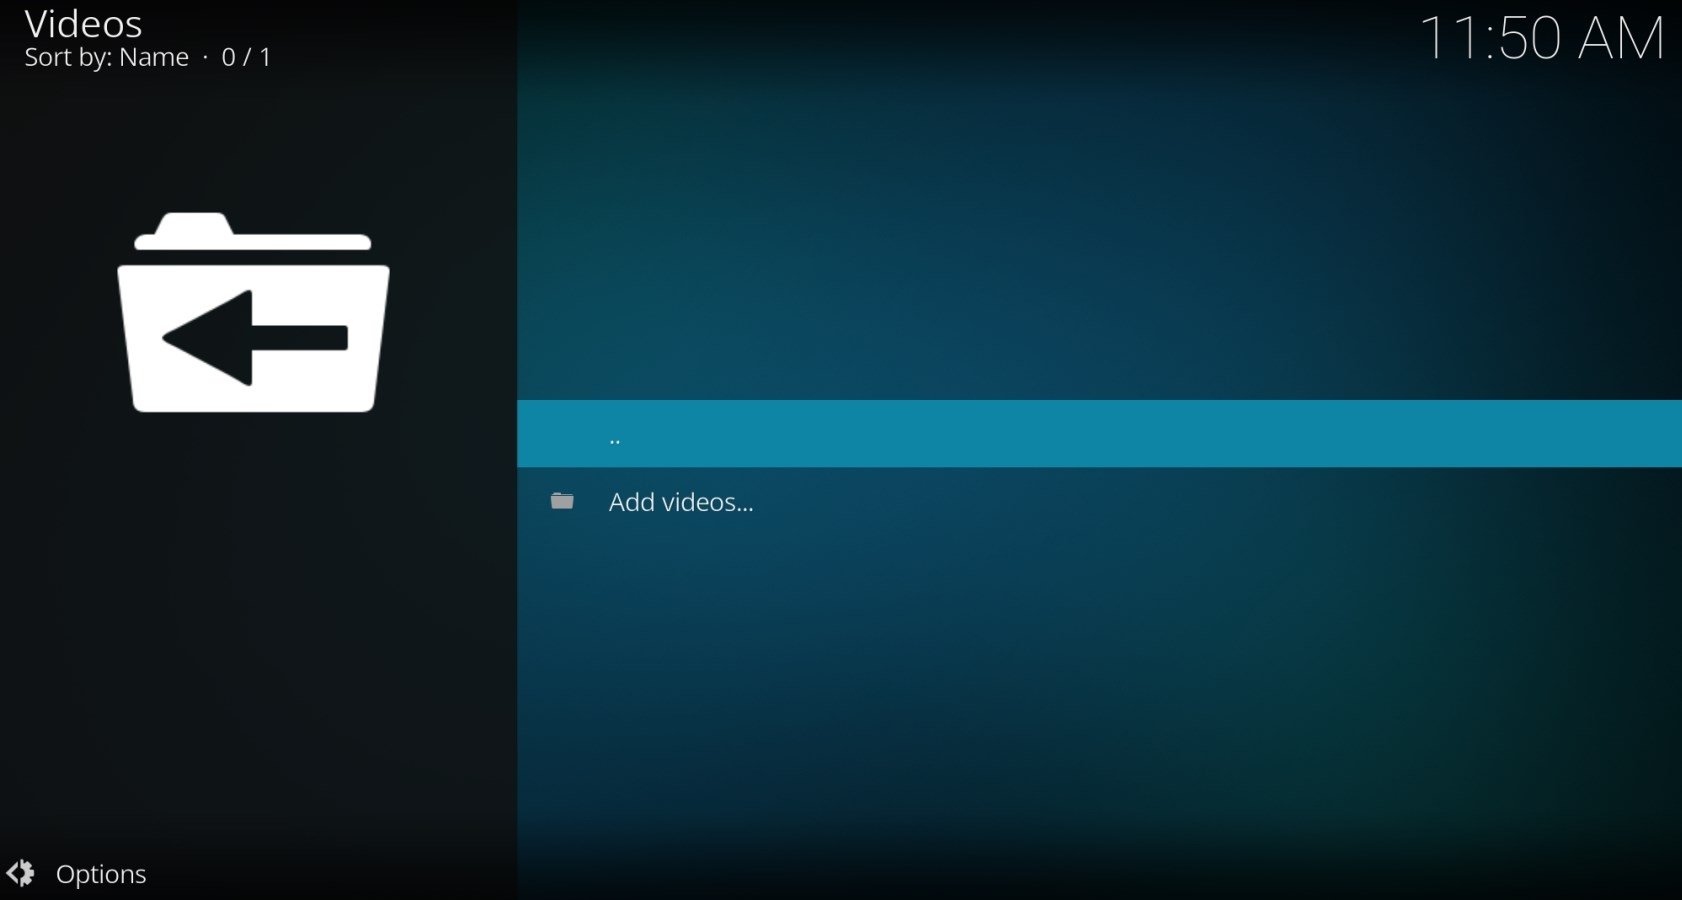 kodi 17 download apk for android 4.4.2